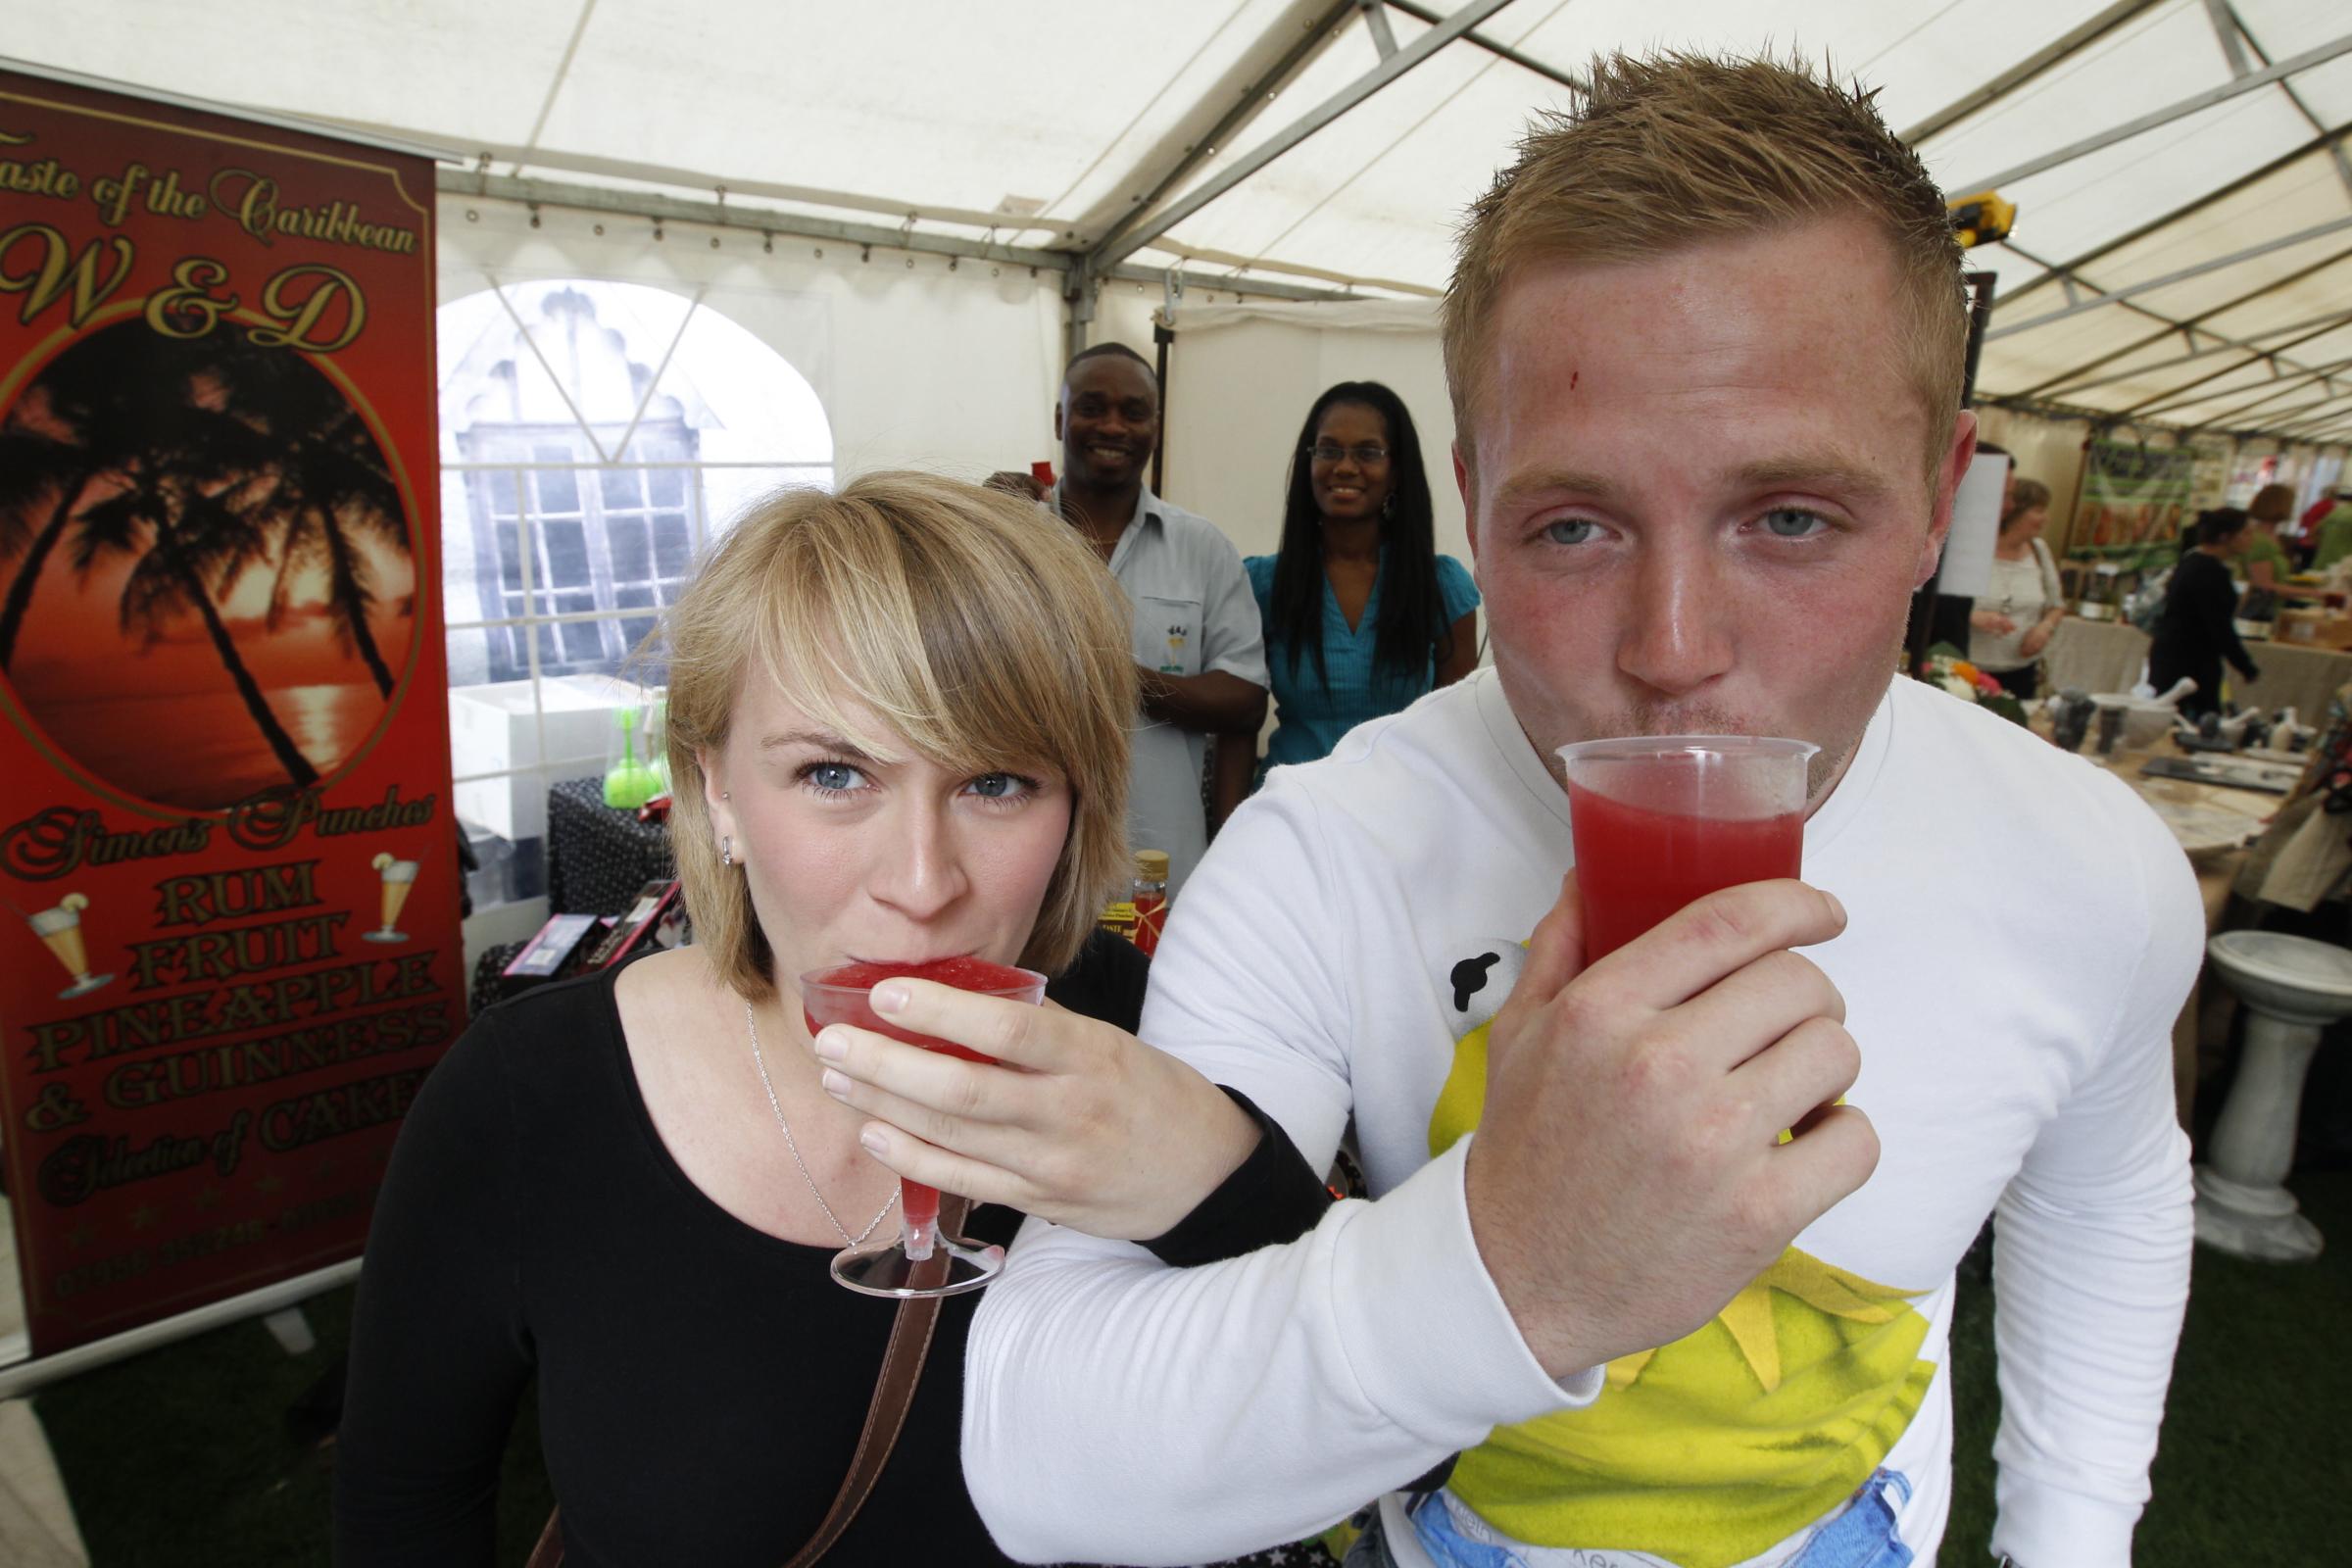 Great minds drink alike - Michael Sargeant and Natalie Hays try a taste of Caribbean punch